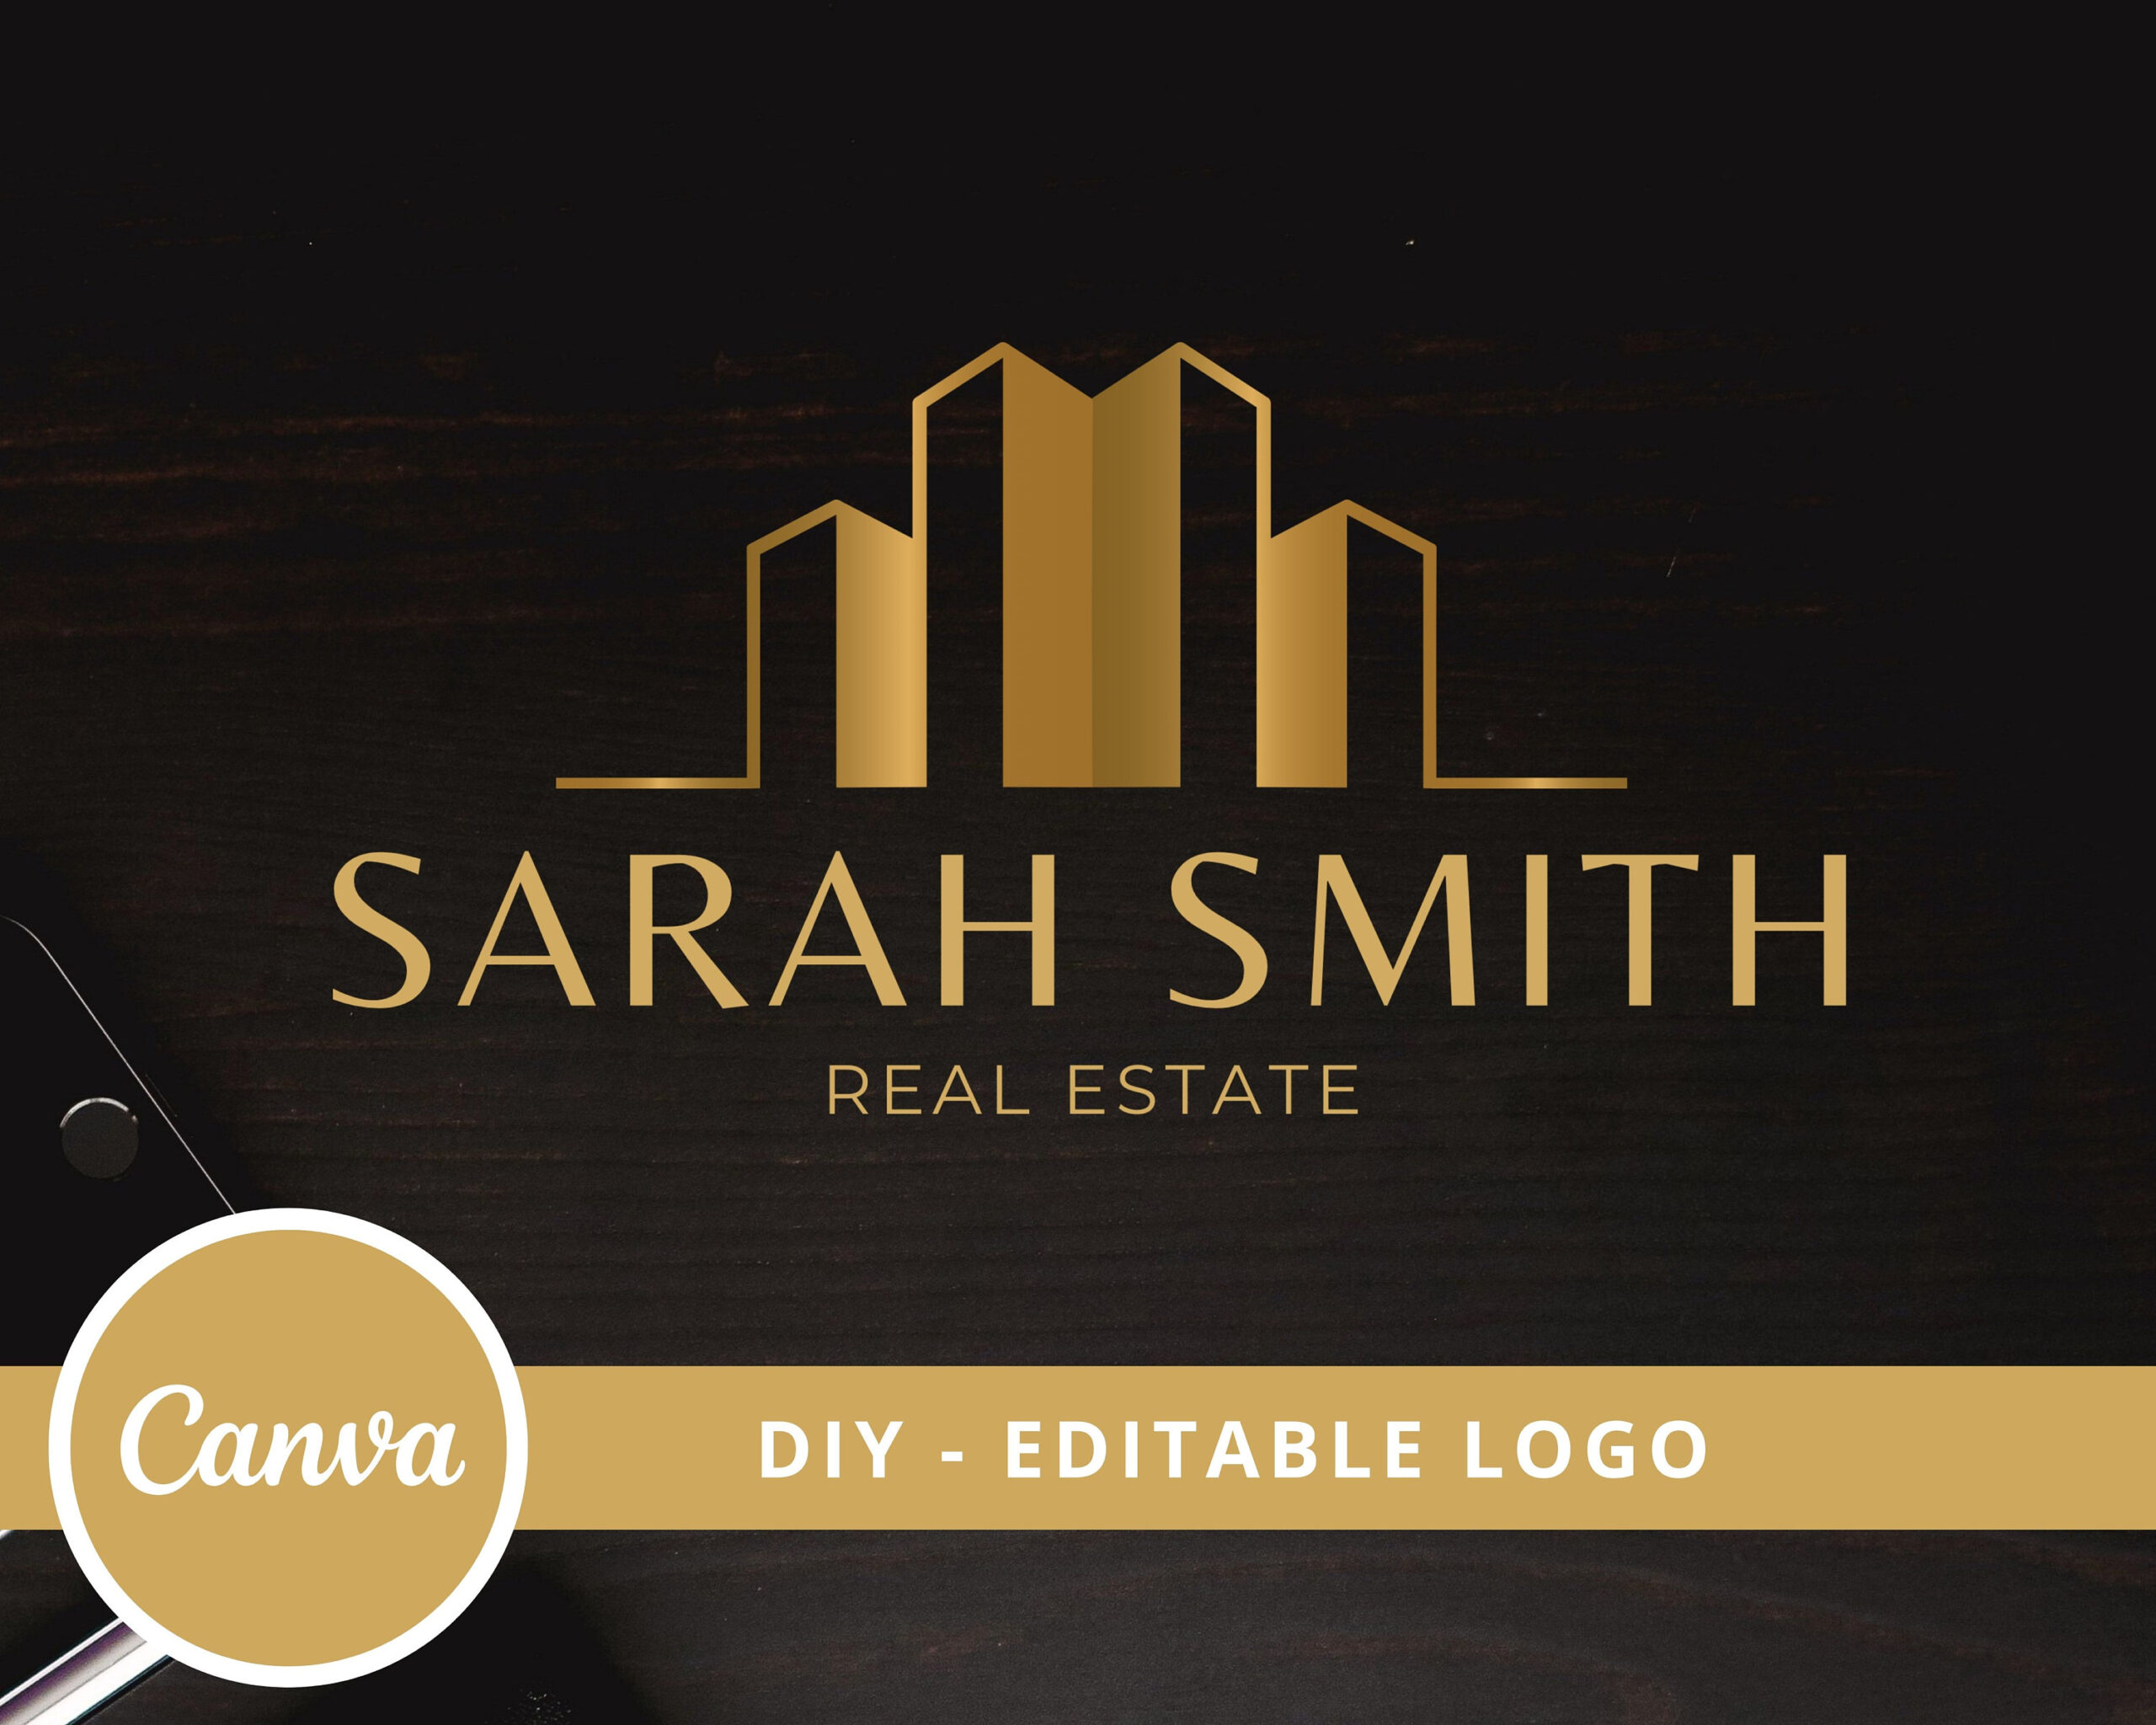 Editable Real Estate Logo Design, DIY Logo, Modern Buildings Black Gold, Canva Template, Instant Access, Edit and Download, Fully Editable